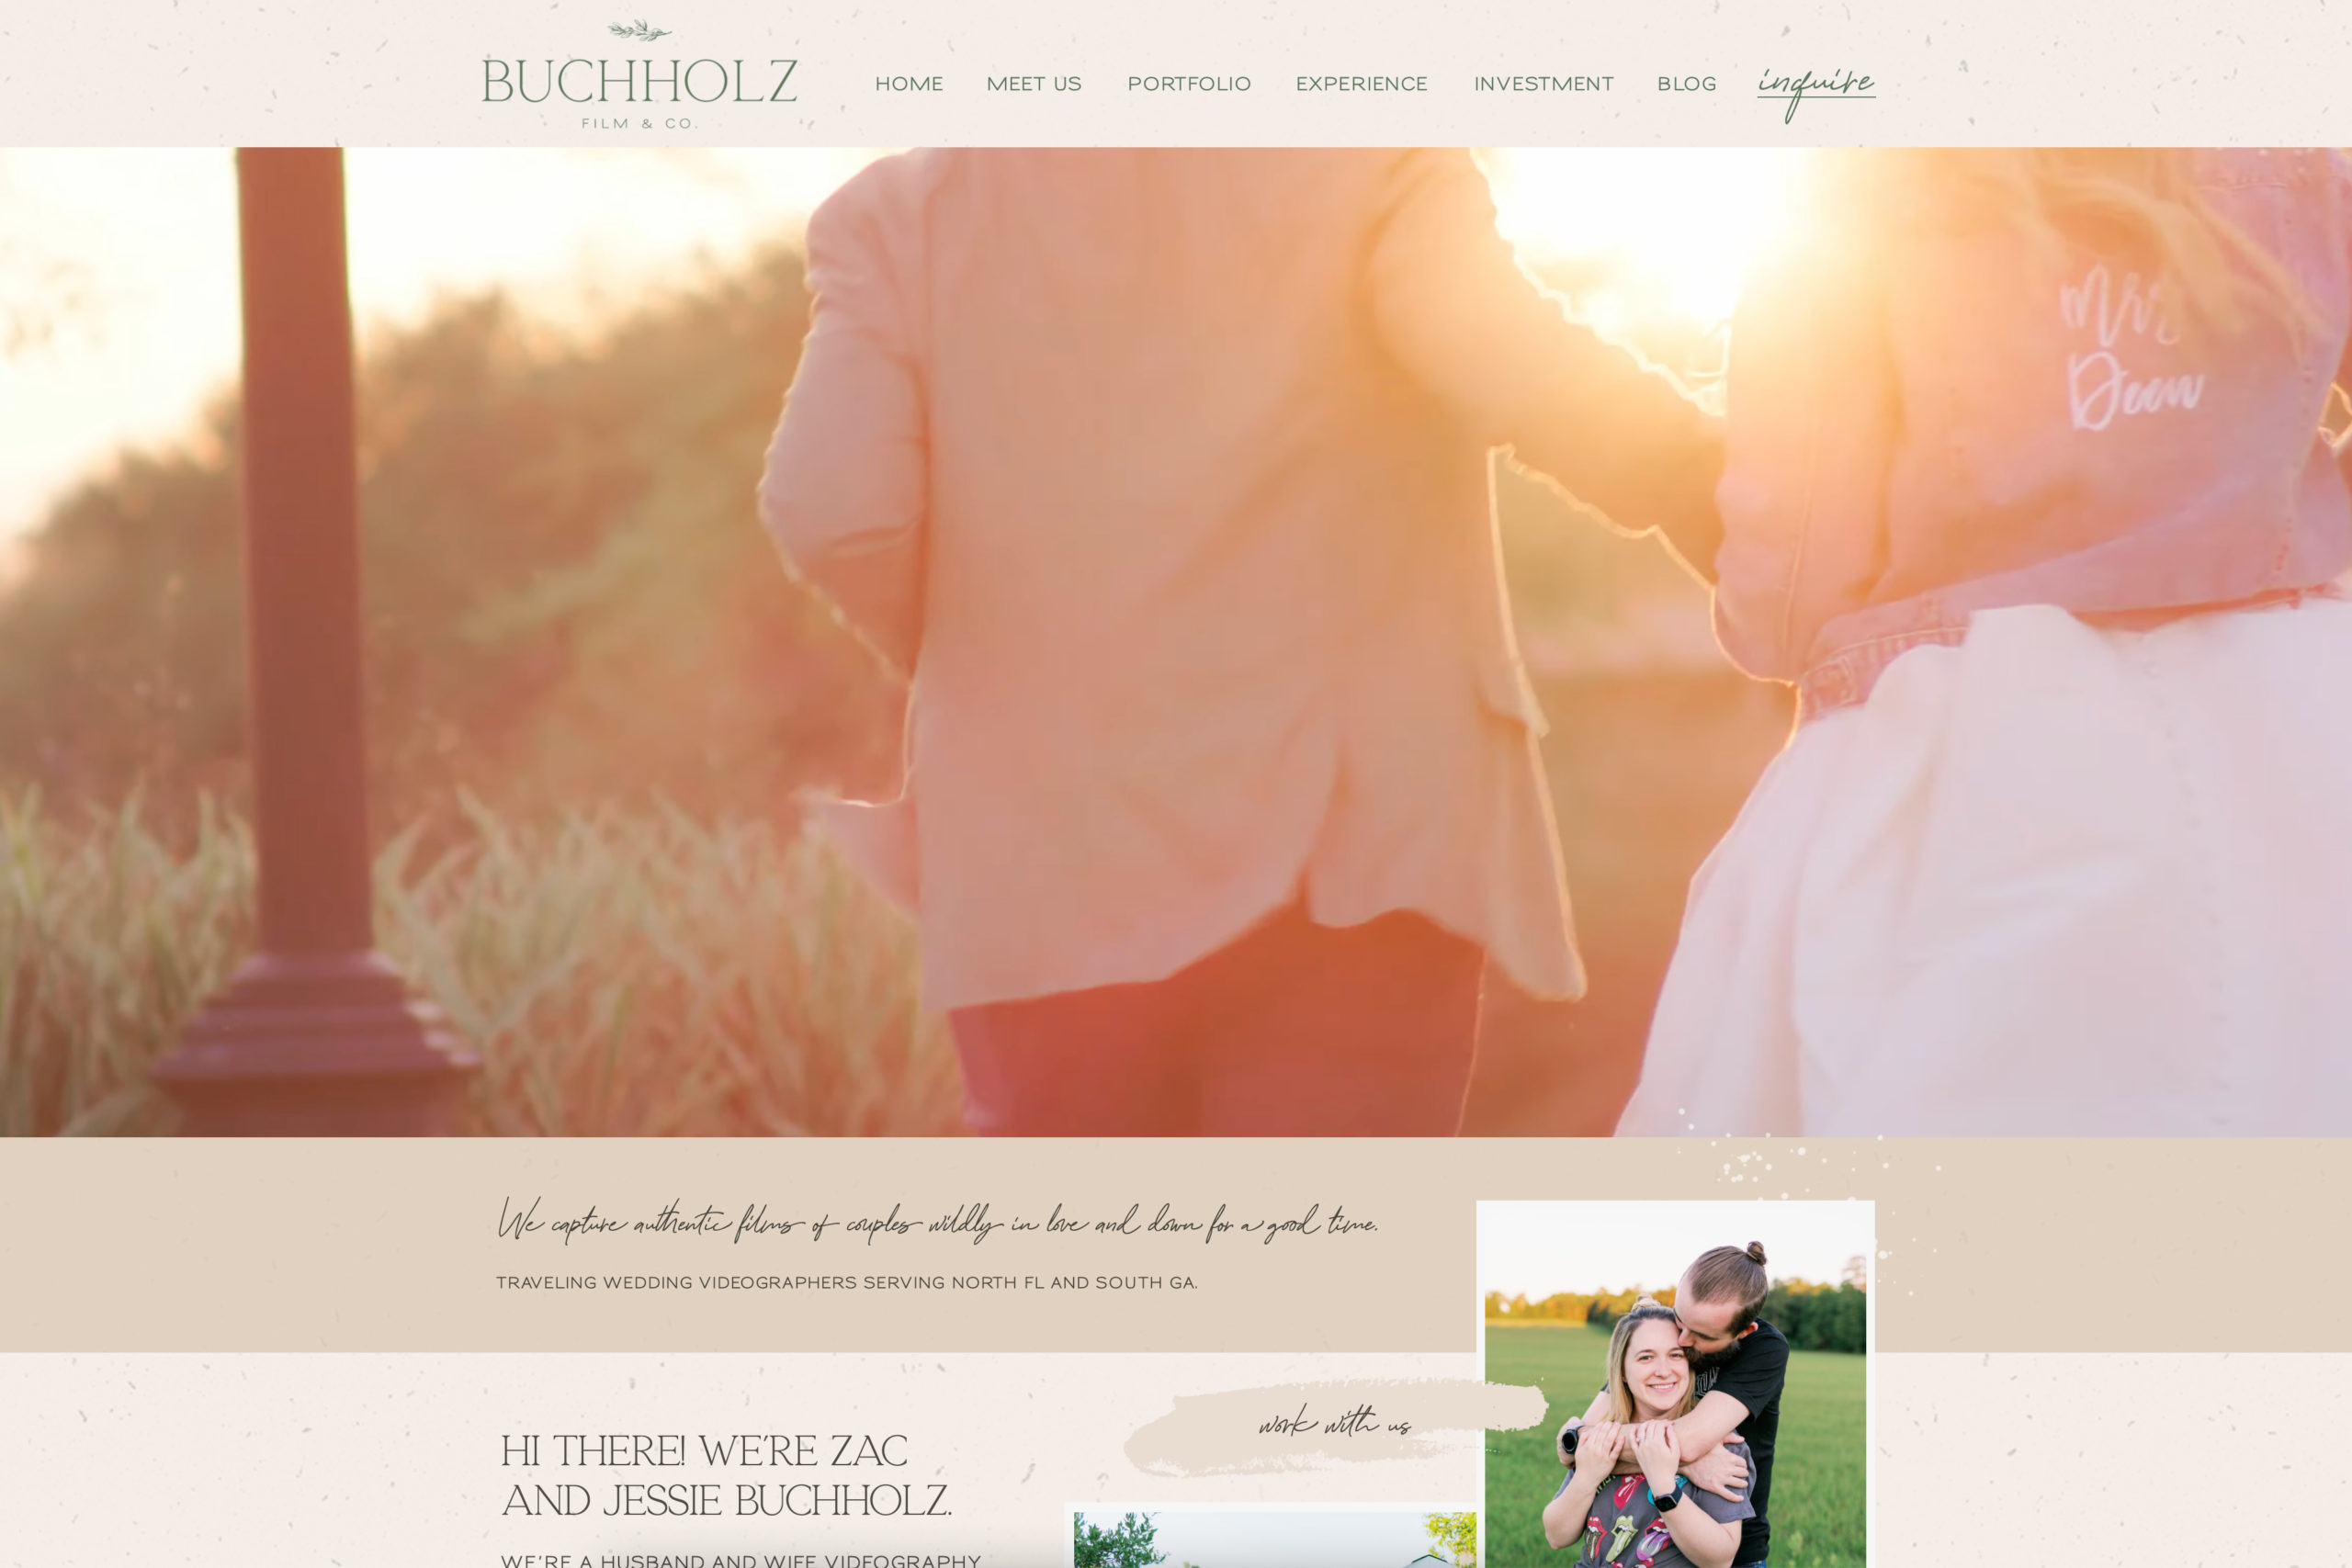 Buchholz Film & Co. Website Launch with Giveaway